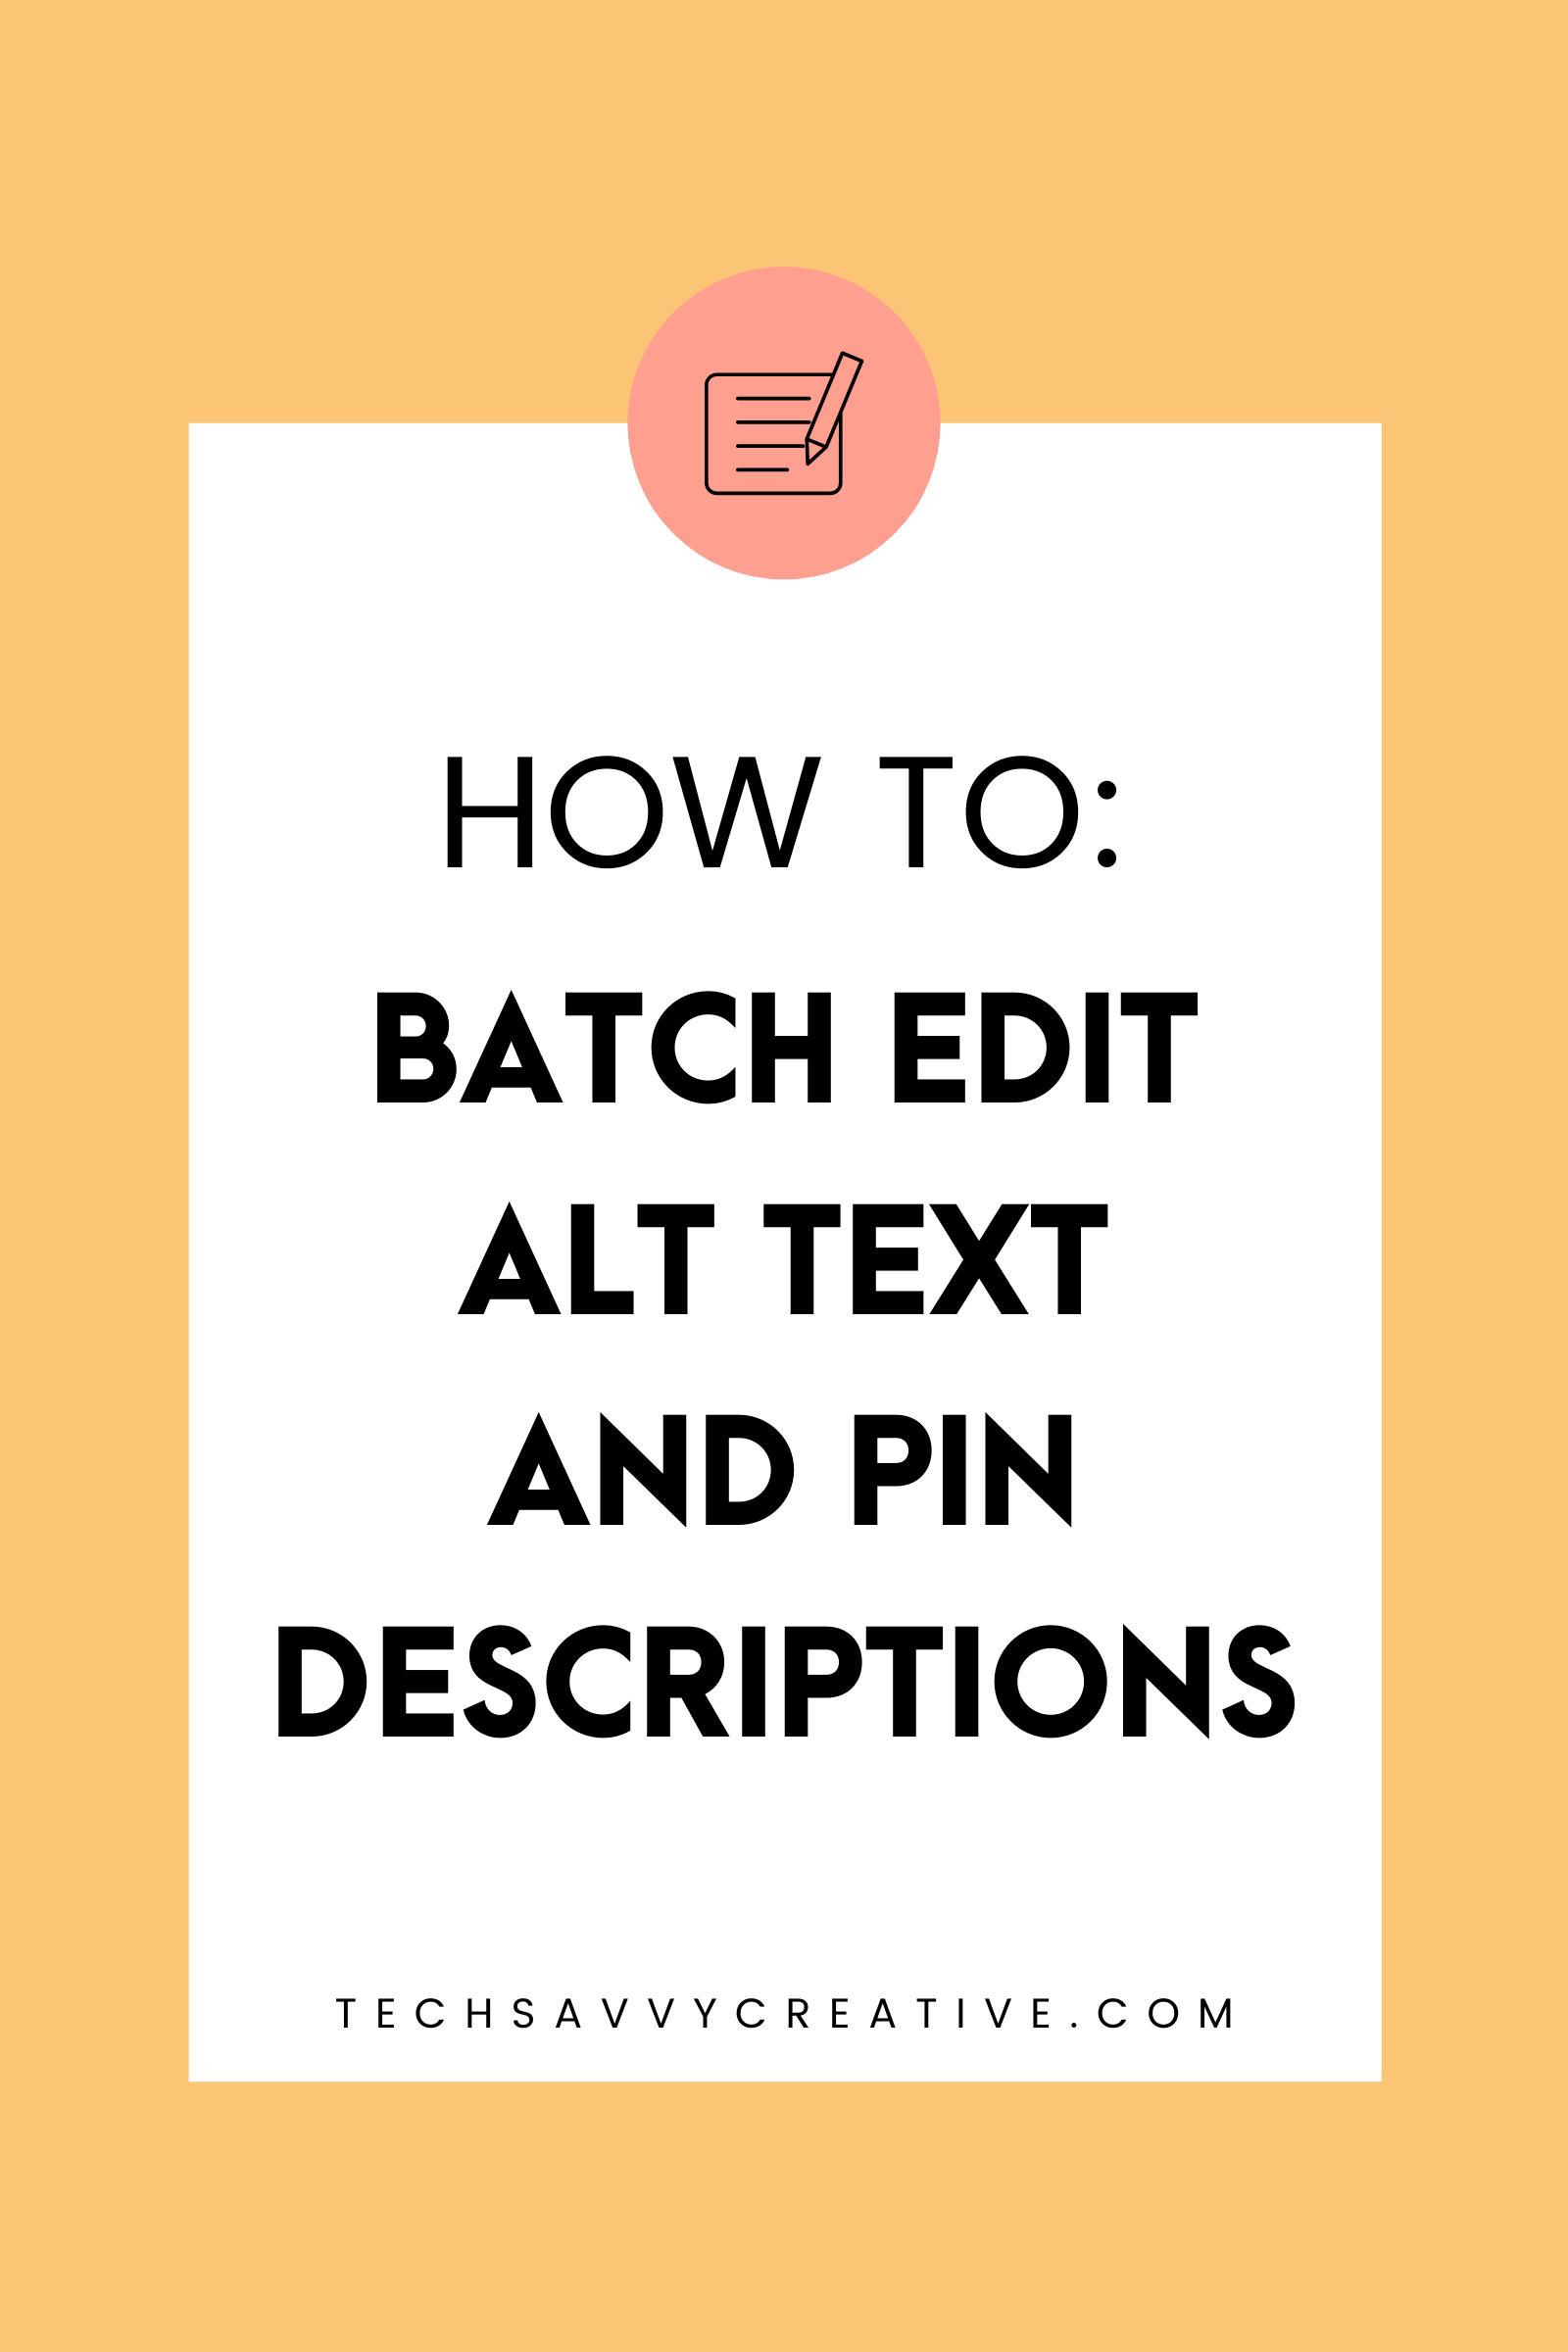 How to Batch Edit Alt Text and Pin Description with Tech Savvy Creative